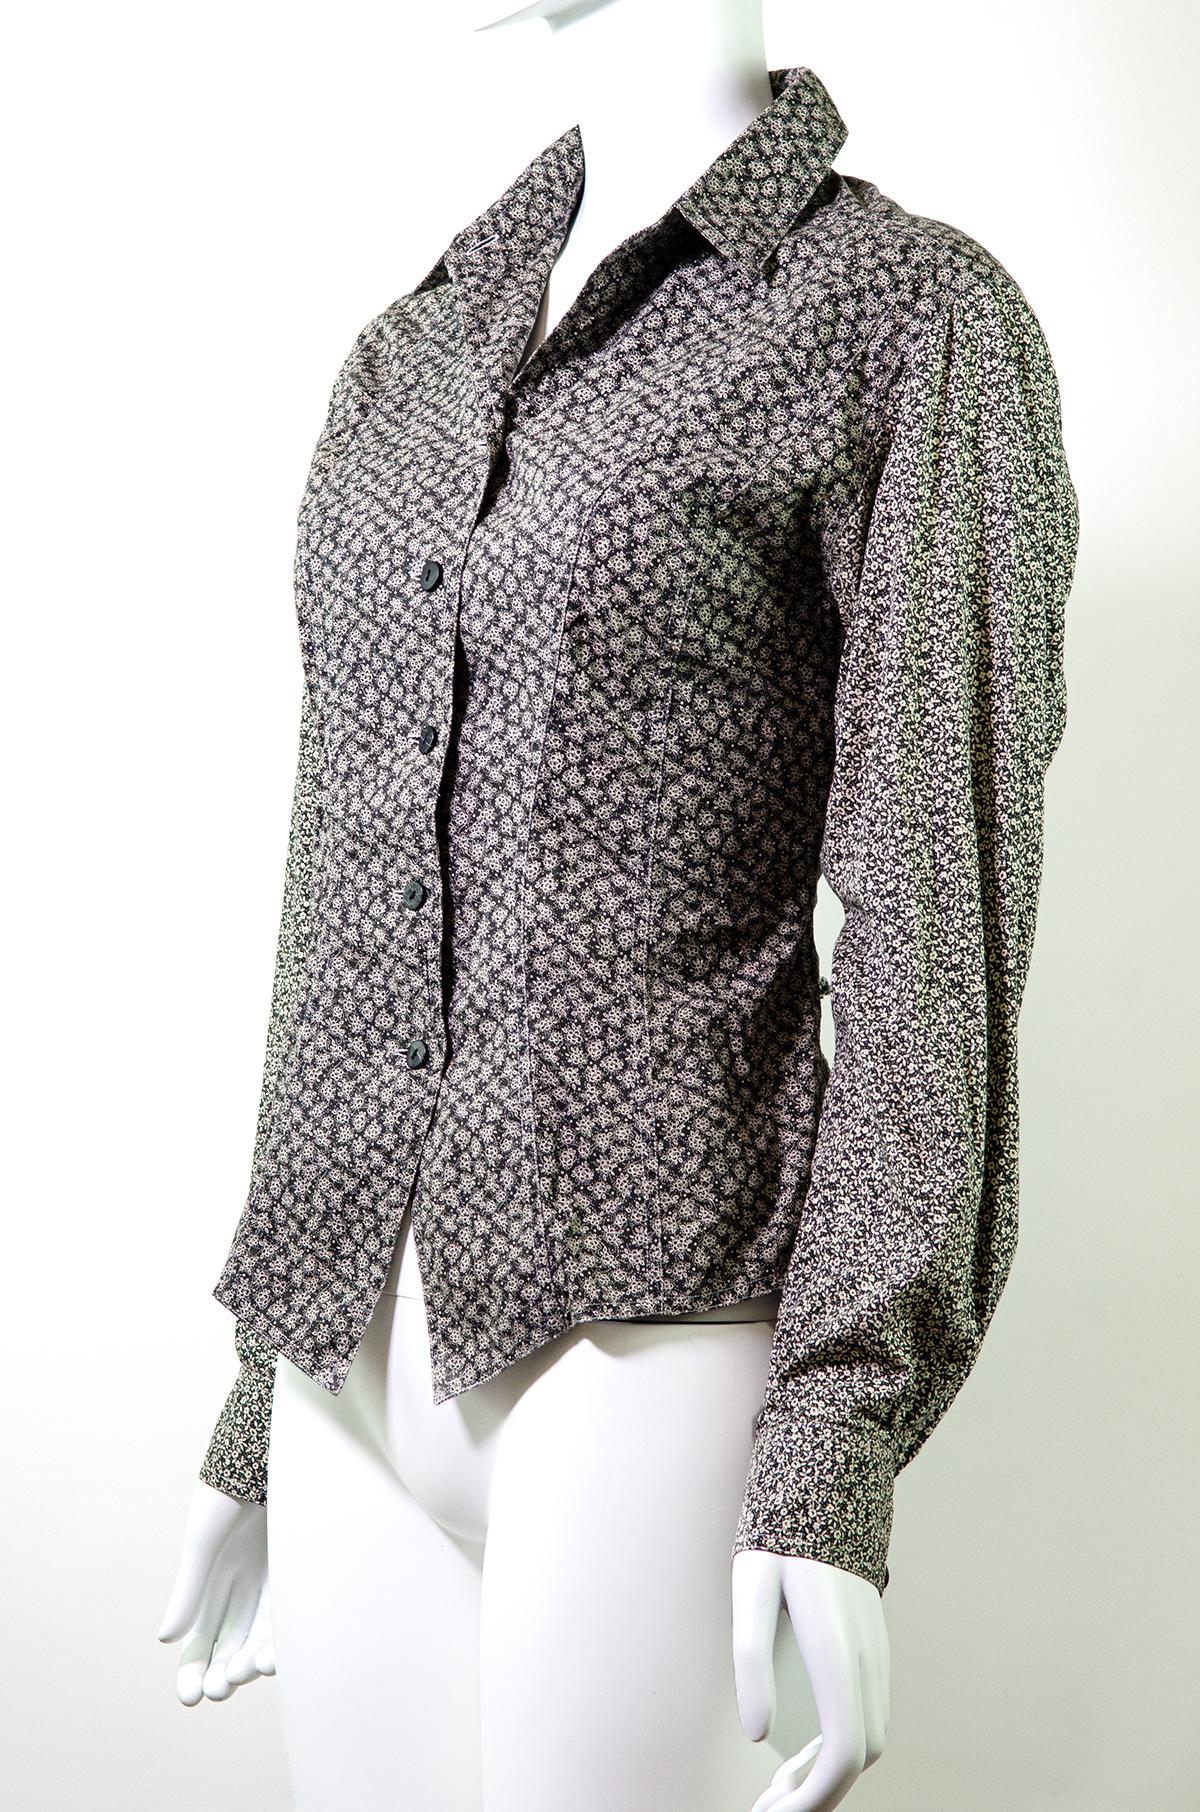 Chantal Thomass Vintage 1990's Lace Up Floral Shirt

Brand: Chantal Thomass
Designer: Chantal Thomass
Collection/Year: 1990's
Fabric: Cotton
Color: Grey
Size: Approx S

Chantal Thomass is the renowned Parisian lingerie brand. Thomass also designed